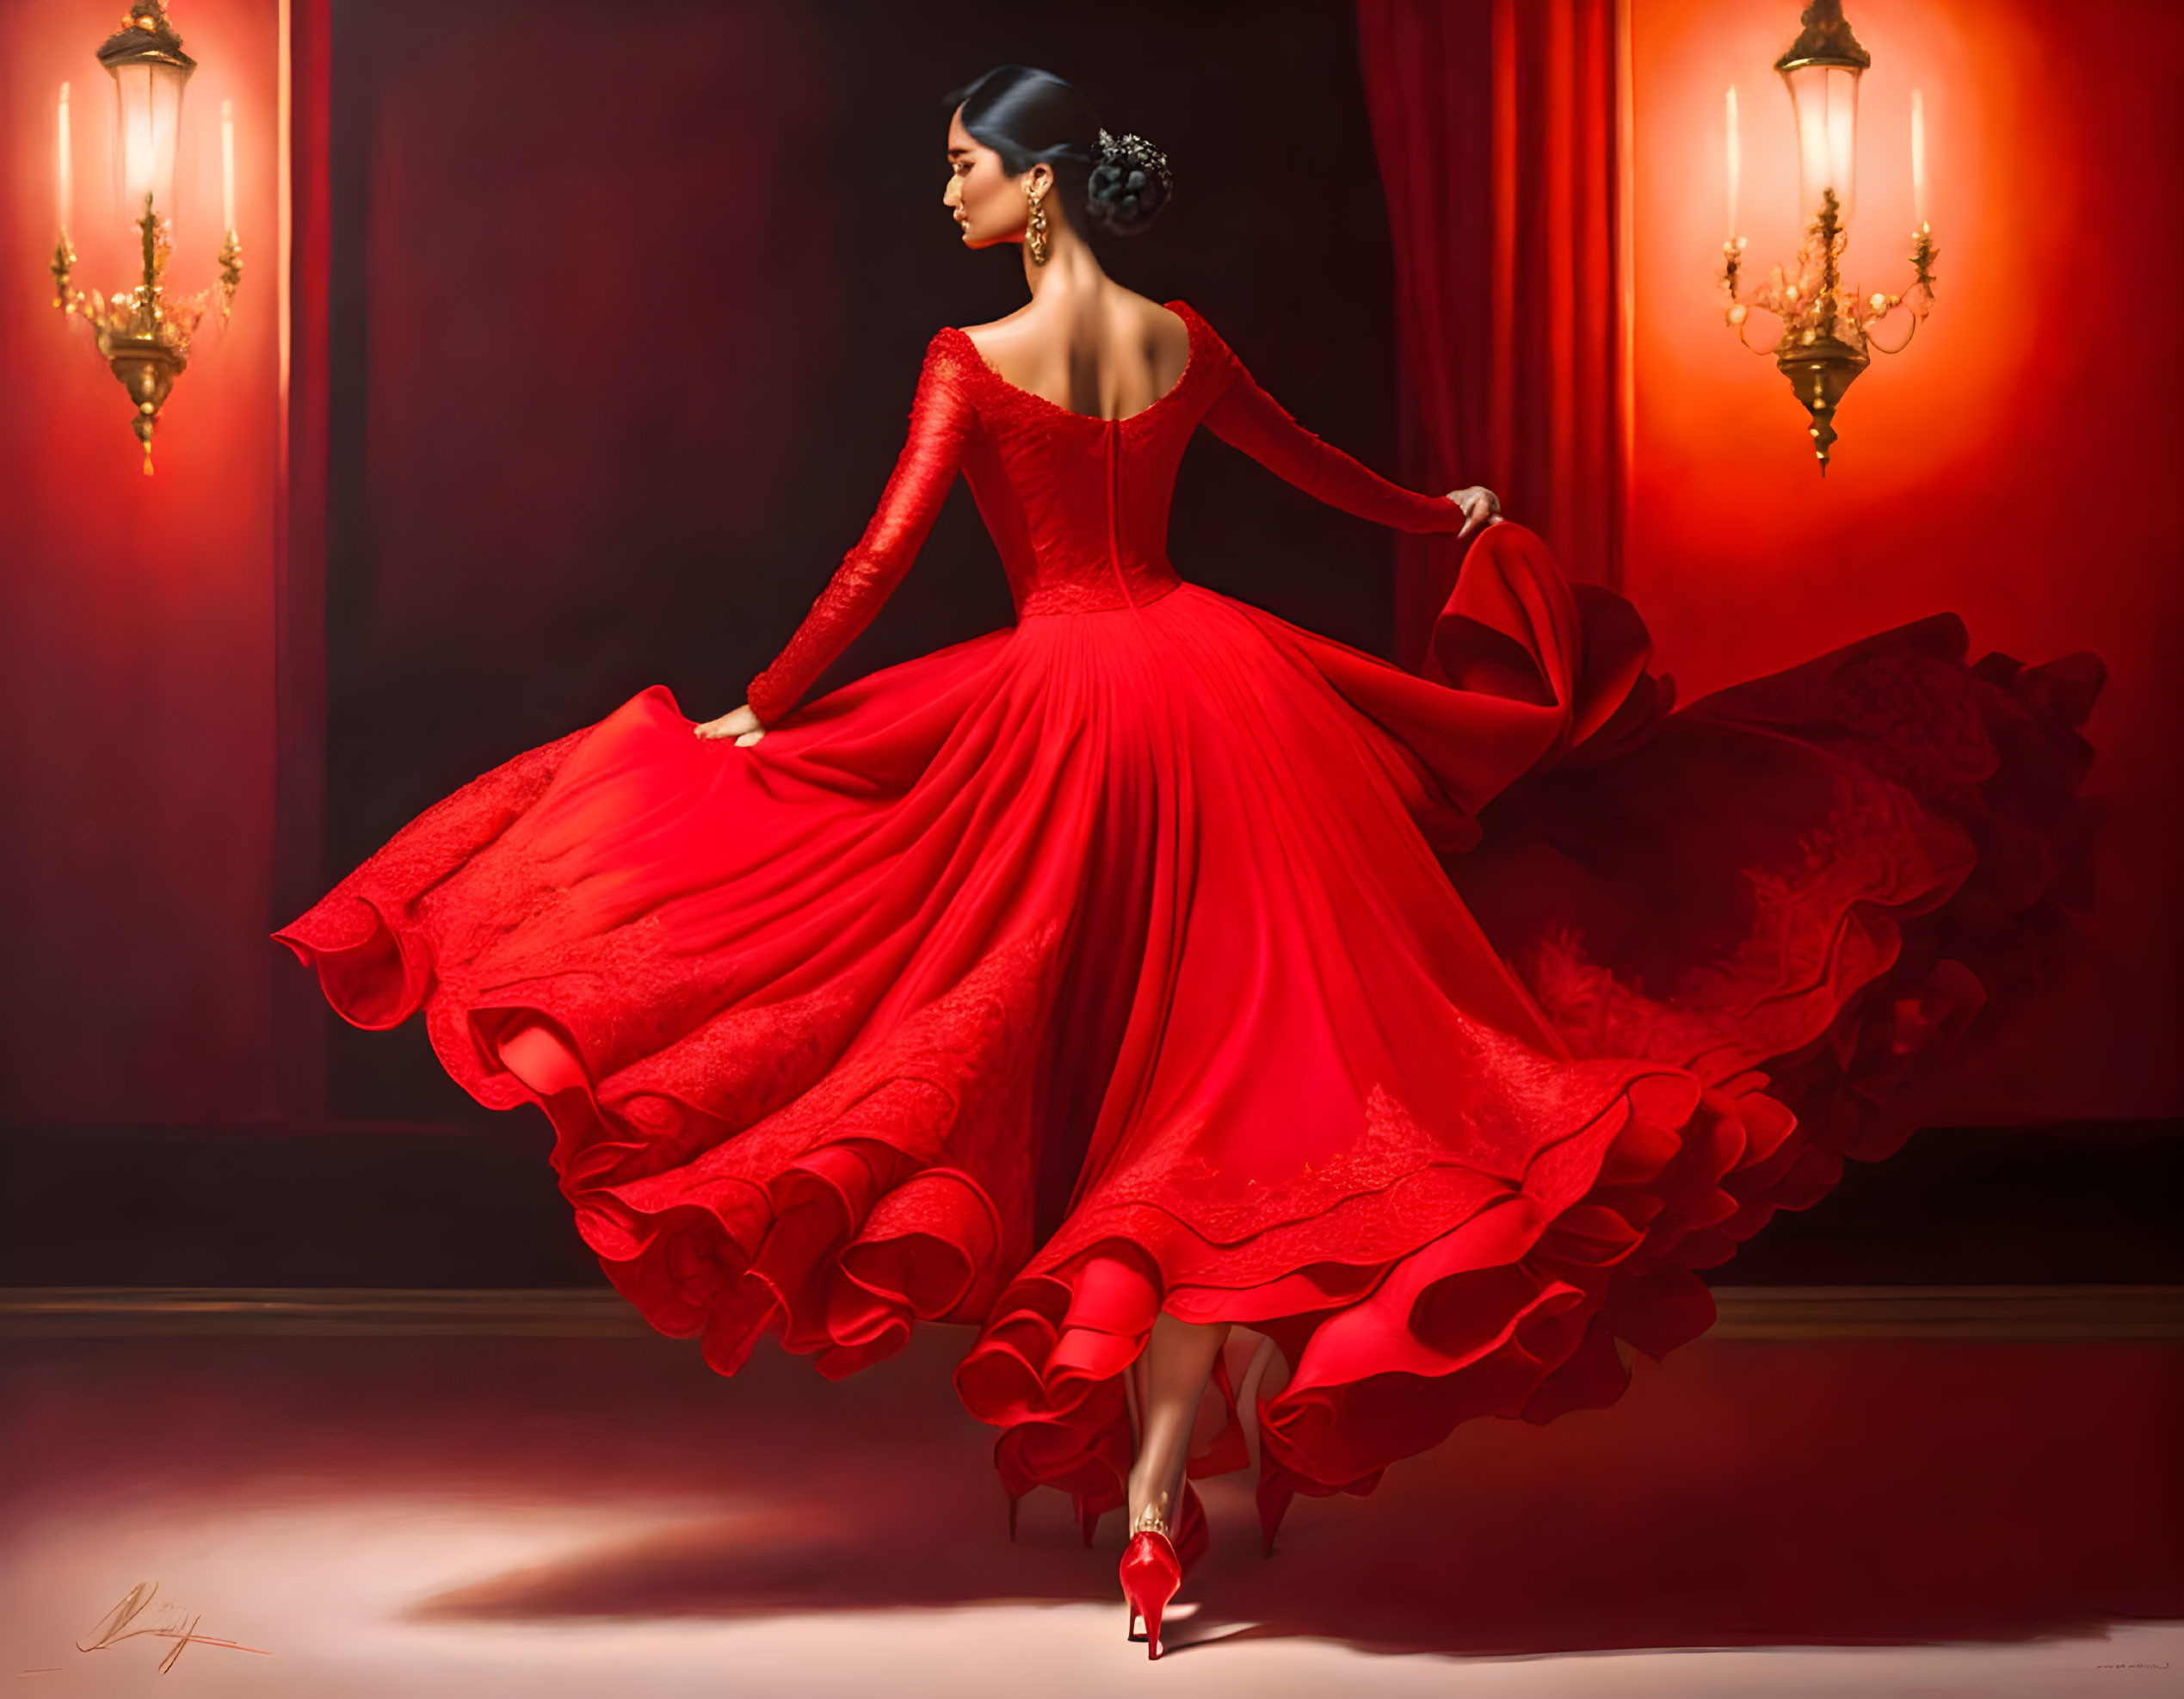  Lady in red is dancing for me